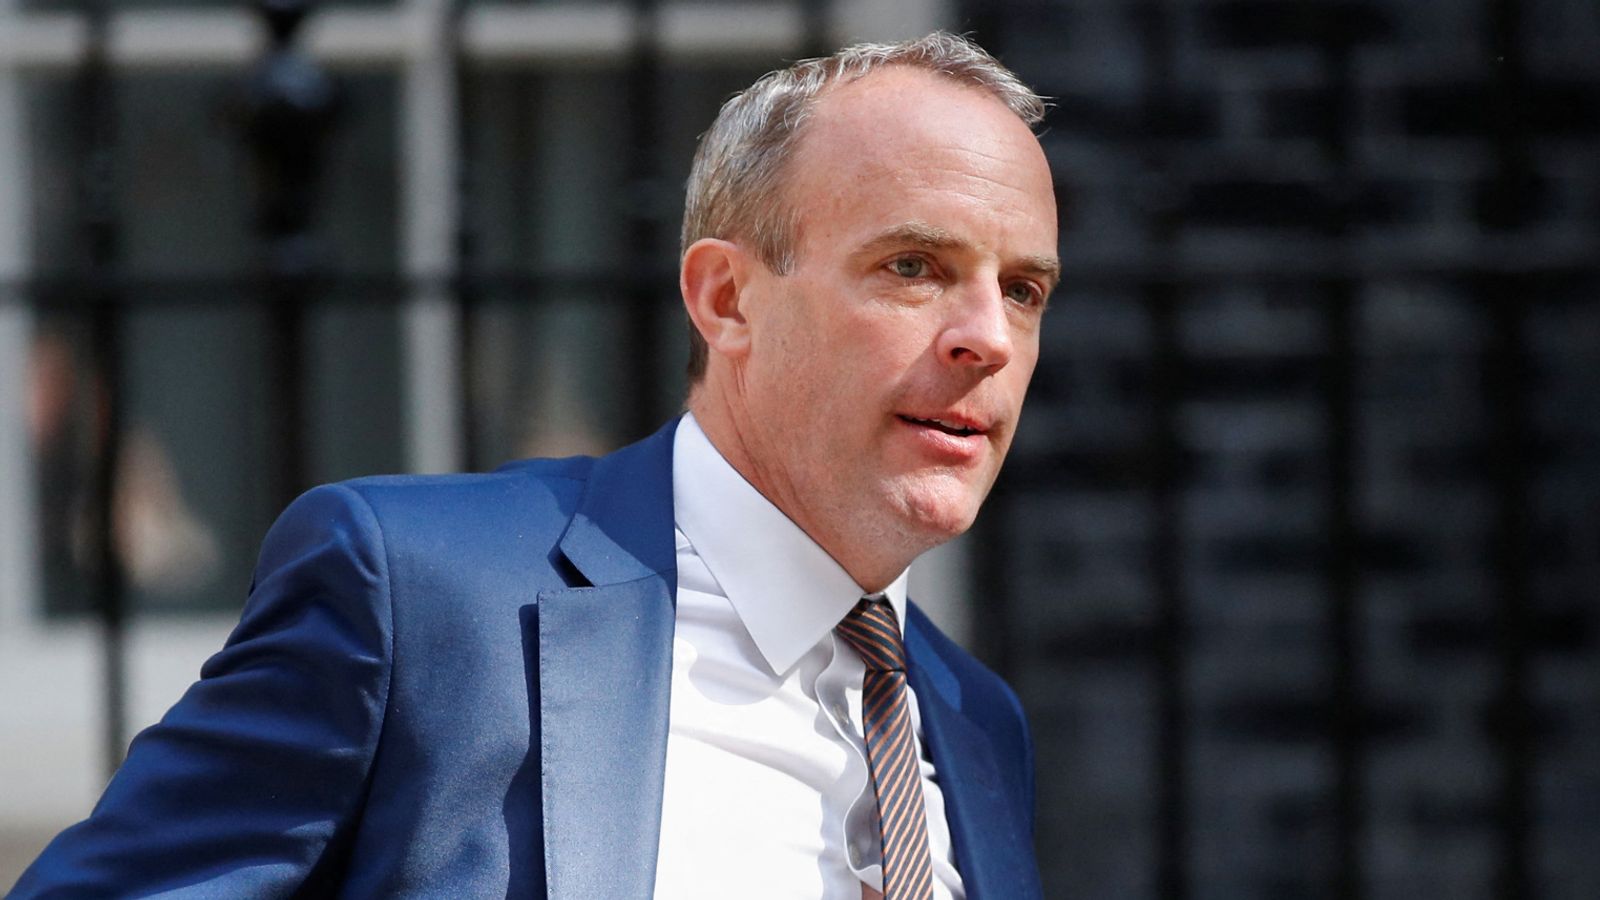 Dominic Raab under the spotlight: Five days of allegations against the deputy prime minister